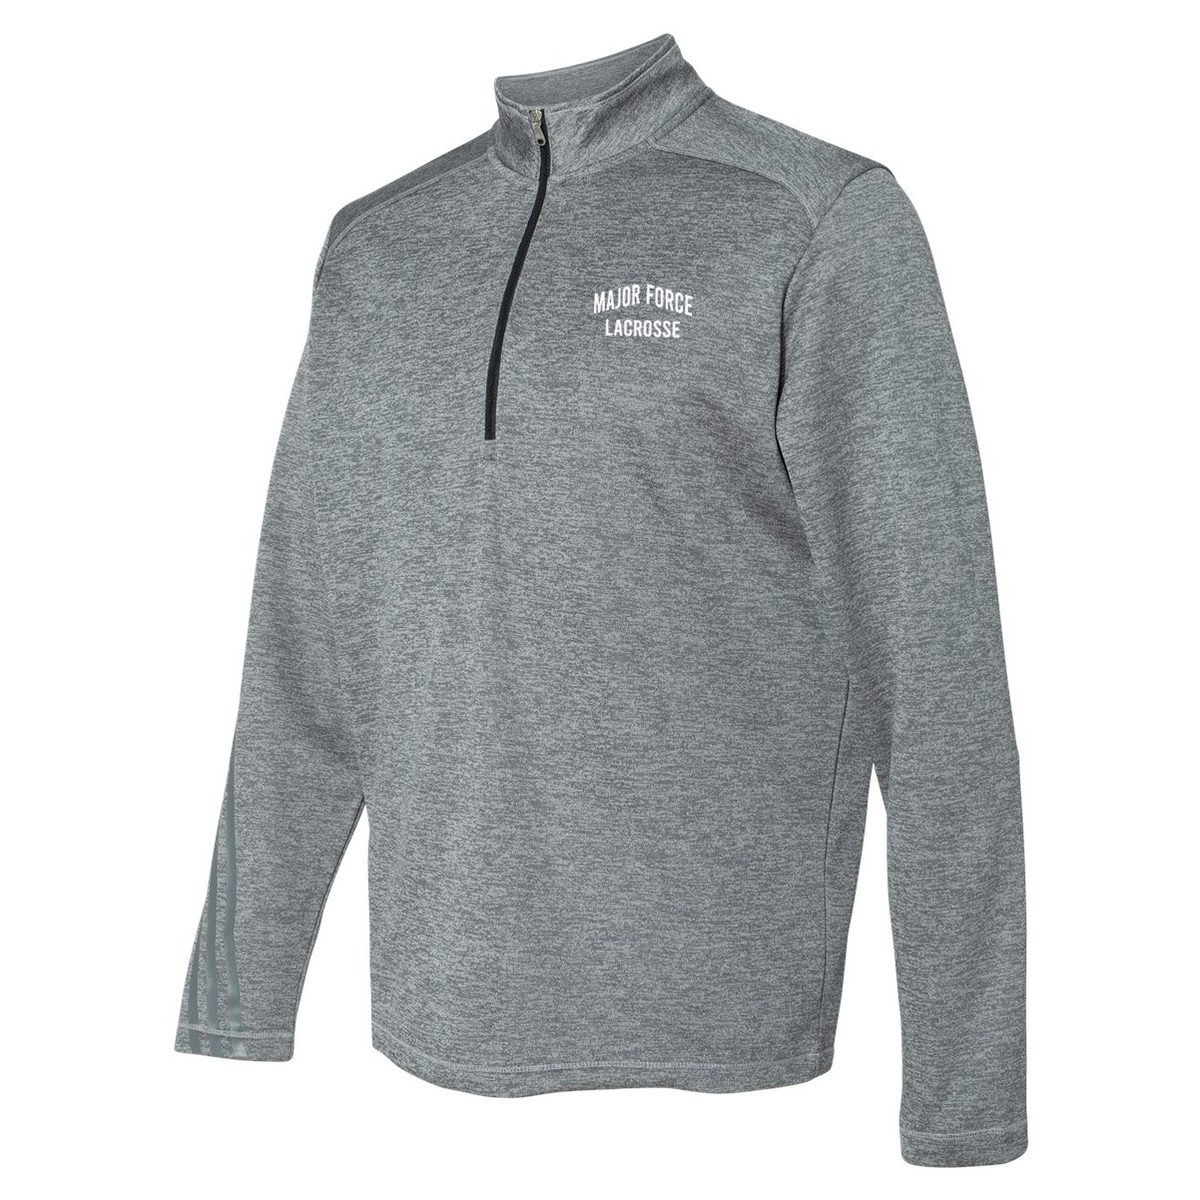 Major Force Lacrosse Adidas Terry Heathered Quarter-Zip Pullover